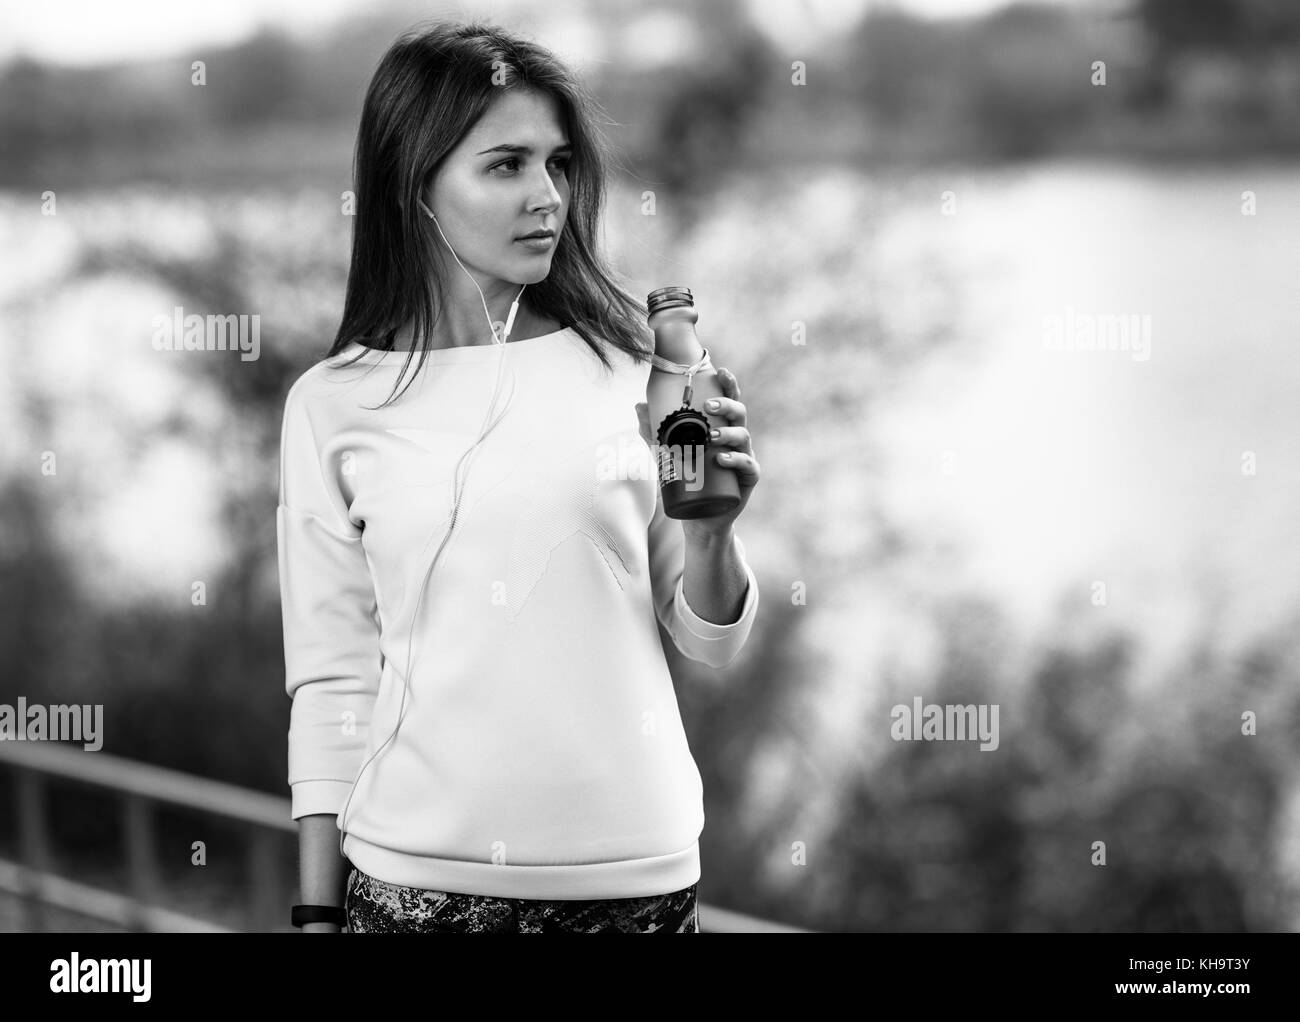 Young fitness girl with bottle of water standing outdoor in city park. Stock Photo